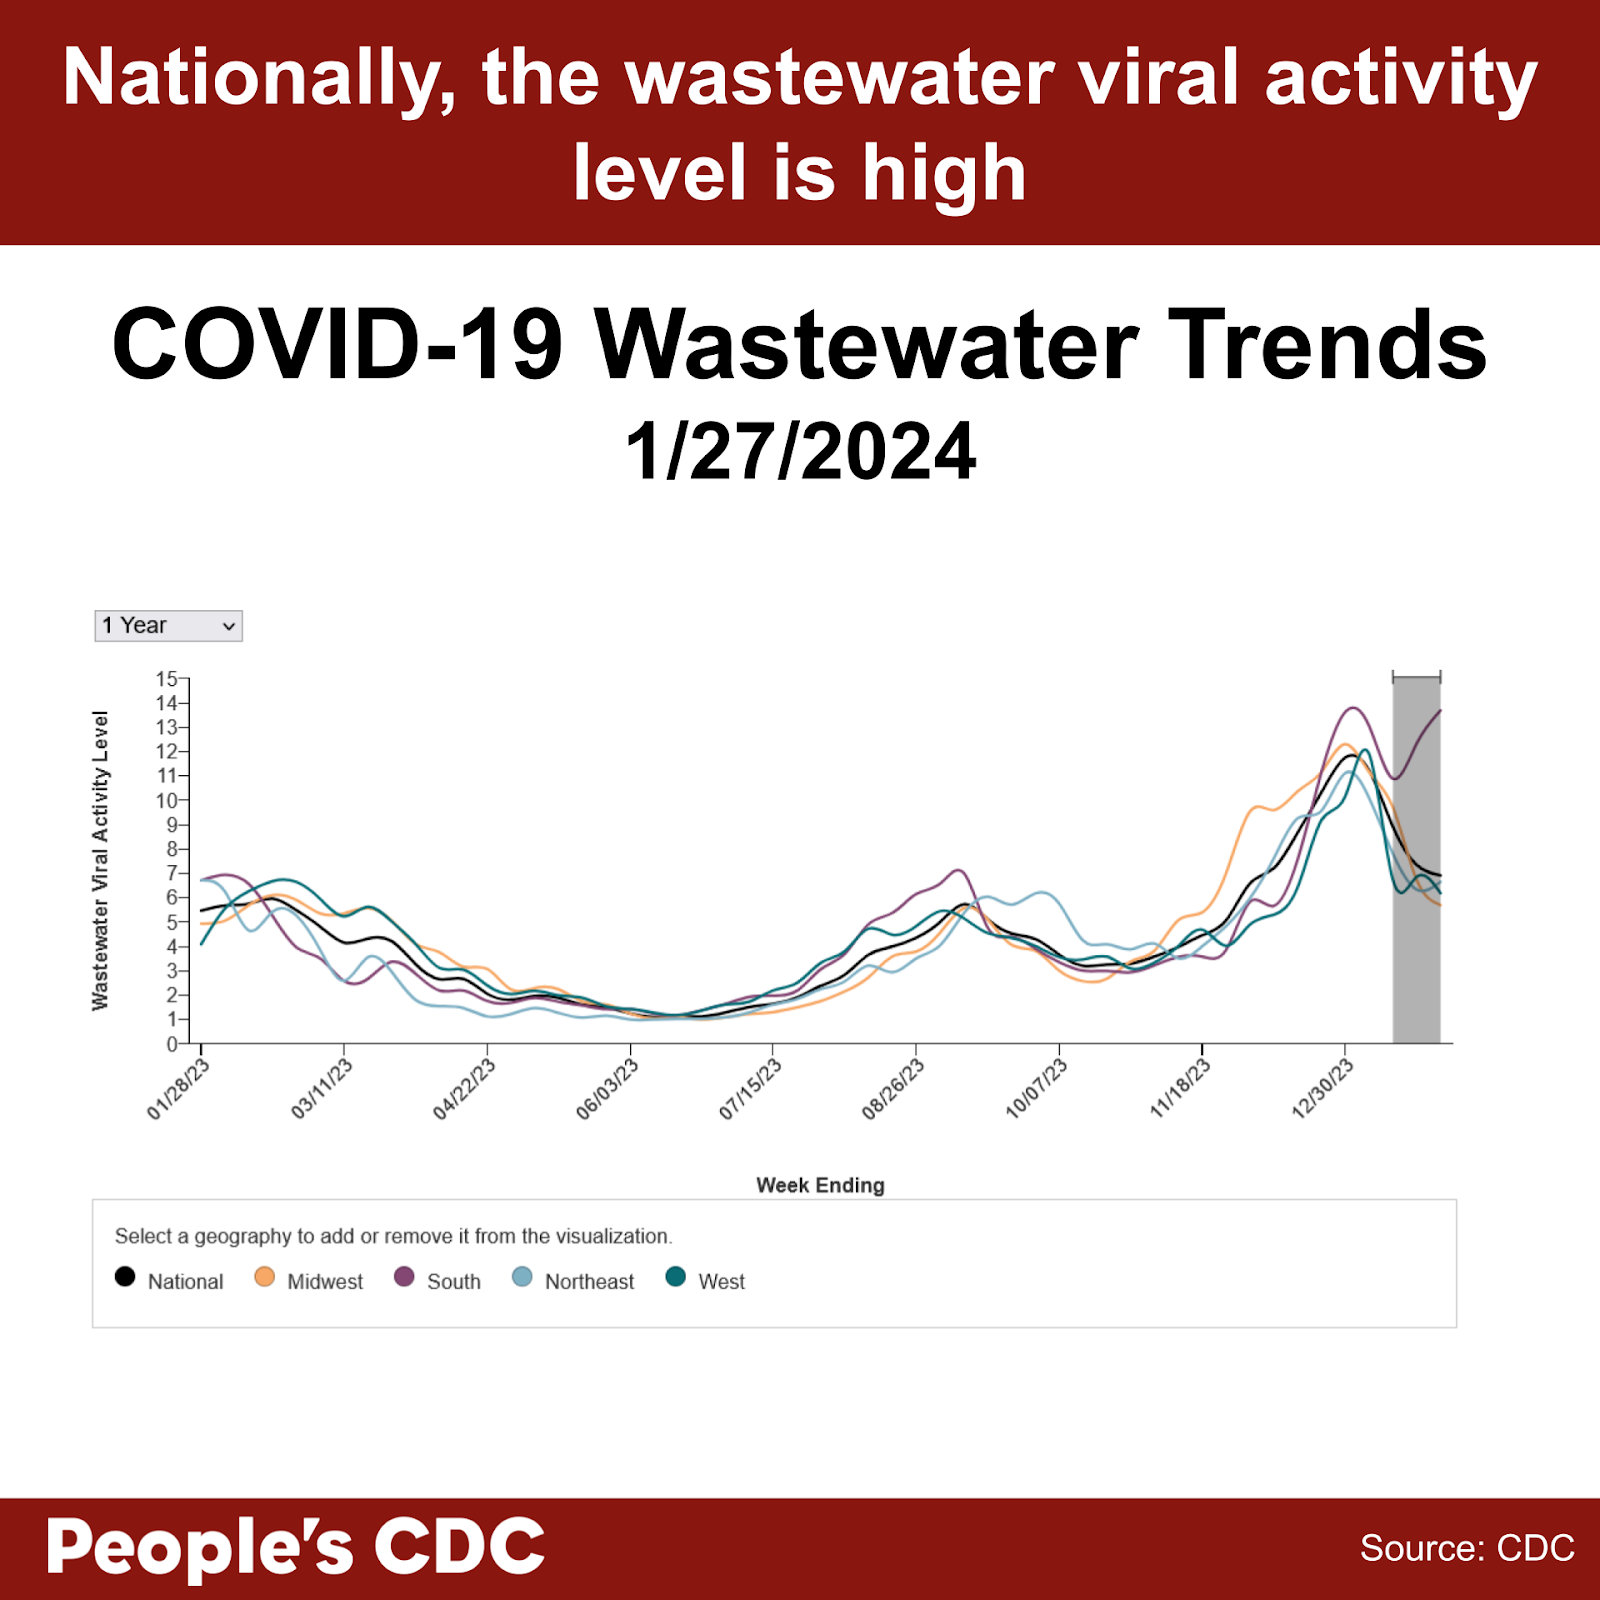 A line graph with “Wastewater Viral Activity Level” indicated on the left-hand vertical axis, going from 0-15, and “week ending” across the horizontal axis, with date labels ranging from 1/28/23 to 12/30/23, with the graph extending through 1/27/24. A key at the bottom indicates line colors. National is black, Midwest is orange, South is purple, Northeast is light blue, and West is green. Viral activity levels in the South peak around 1/27/24  between 13 and 14, having grown from between 4 and 7 beginning on 11/25/23. The graph indicates an earlier peak around 9/02/23, between 4 and 7. Within the gray-shaded provisional data provided for the last 2 weeks, most geographical regions begin to trend downward except for the South and the Northeast. Text above the graph reads “Nationally, the wastewater viral activity level is high.  COVID-19 Wastewater Trends 1/27/2024. Text below the People’s CDC. Source: CDC.”